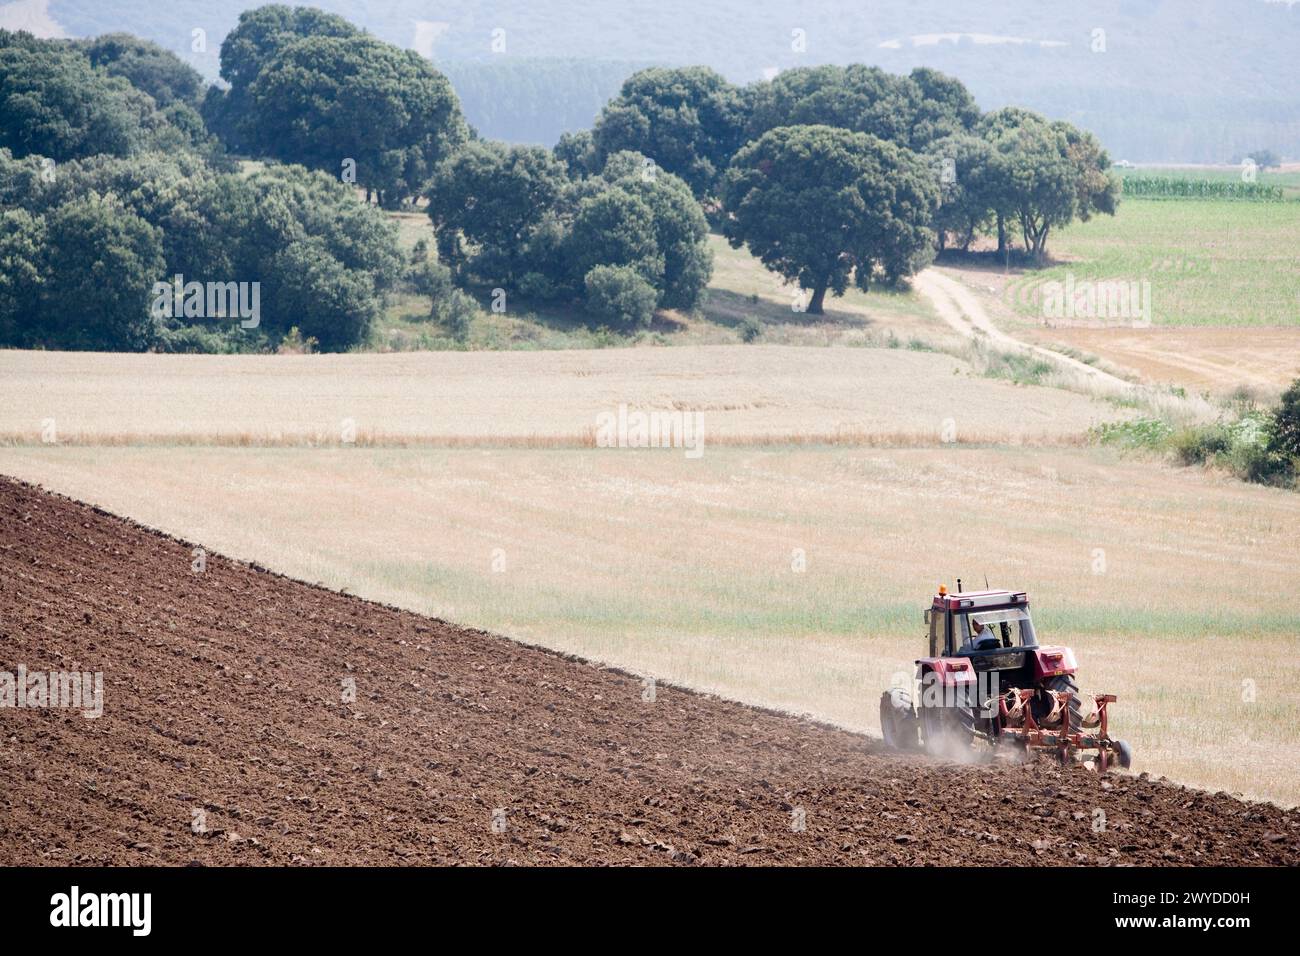 Agricultural machinery. Tractor ploughing the land. Mouldboard plough. Harvesting of cereals, Oco-Navarra (near Estella), Navarre, Spain. Stock Photo